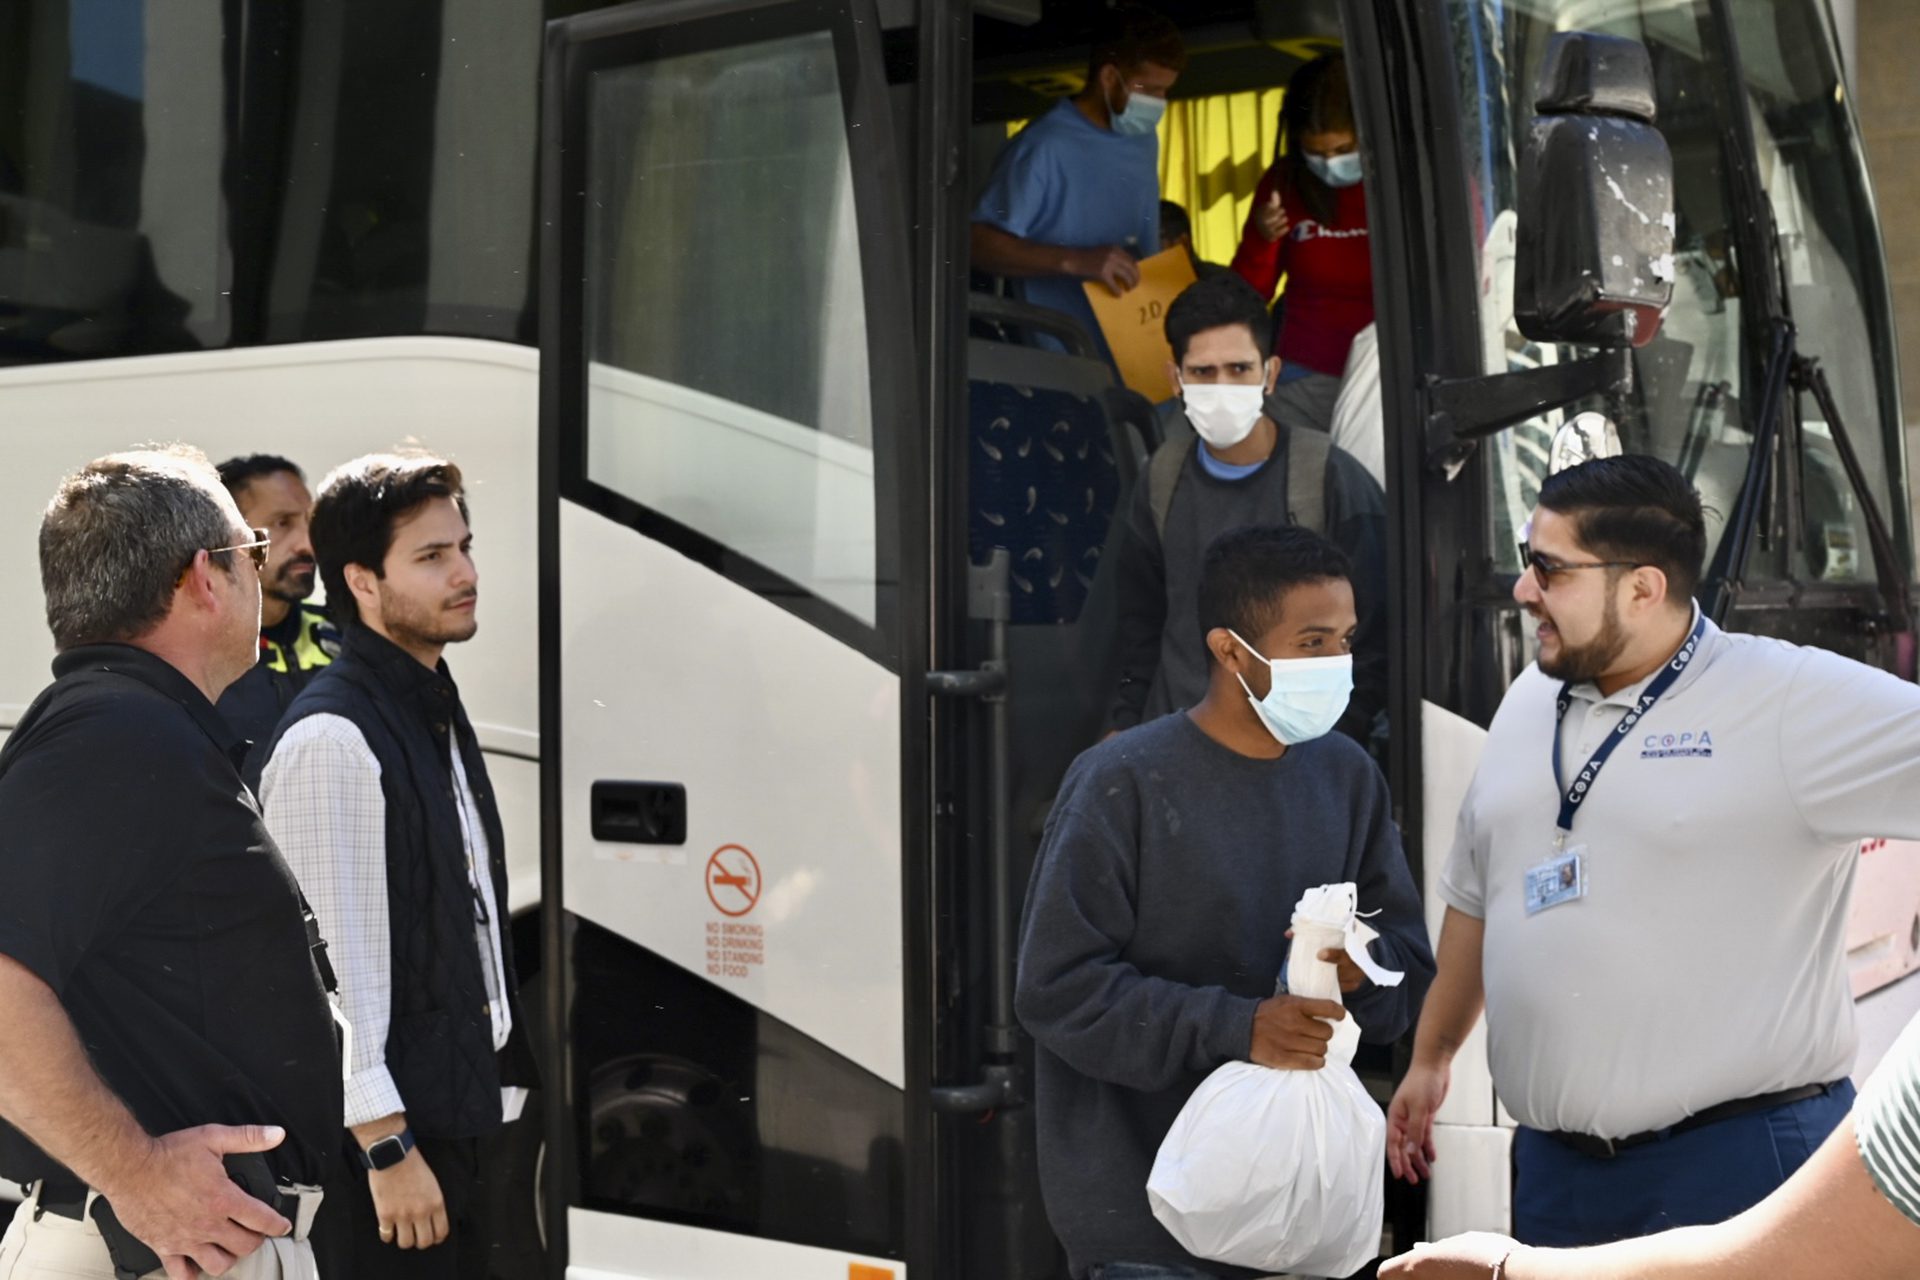 migrants getting off of a bus with masks and holding their belongings in plastic bags